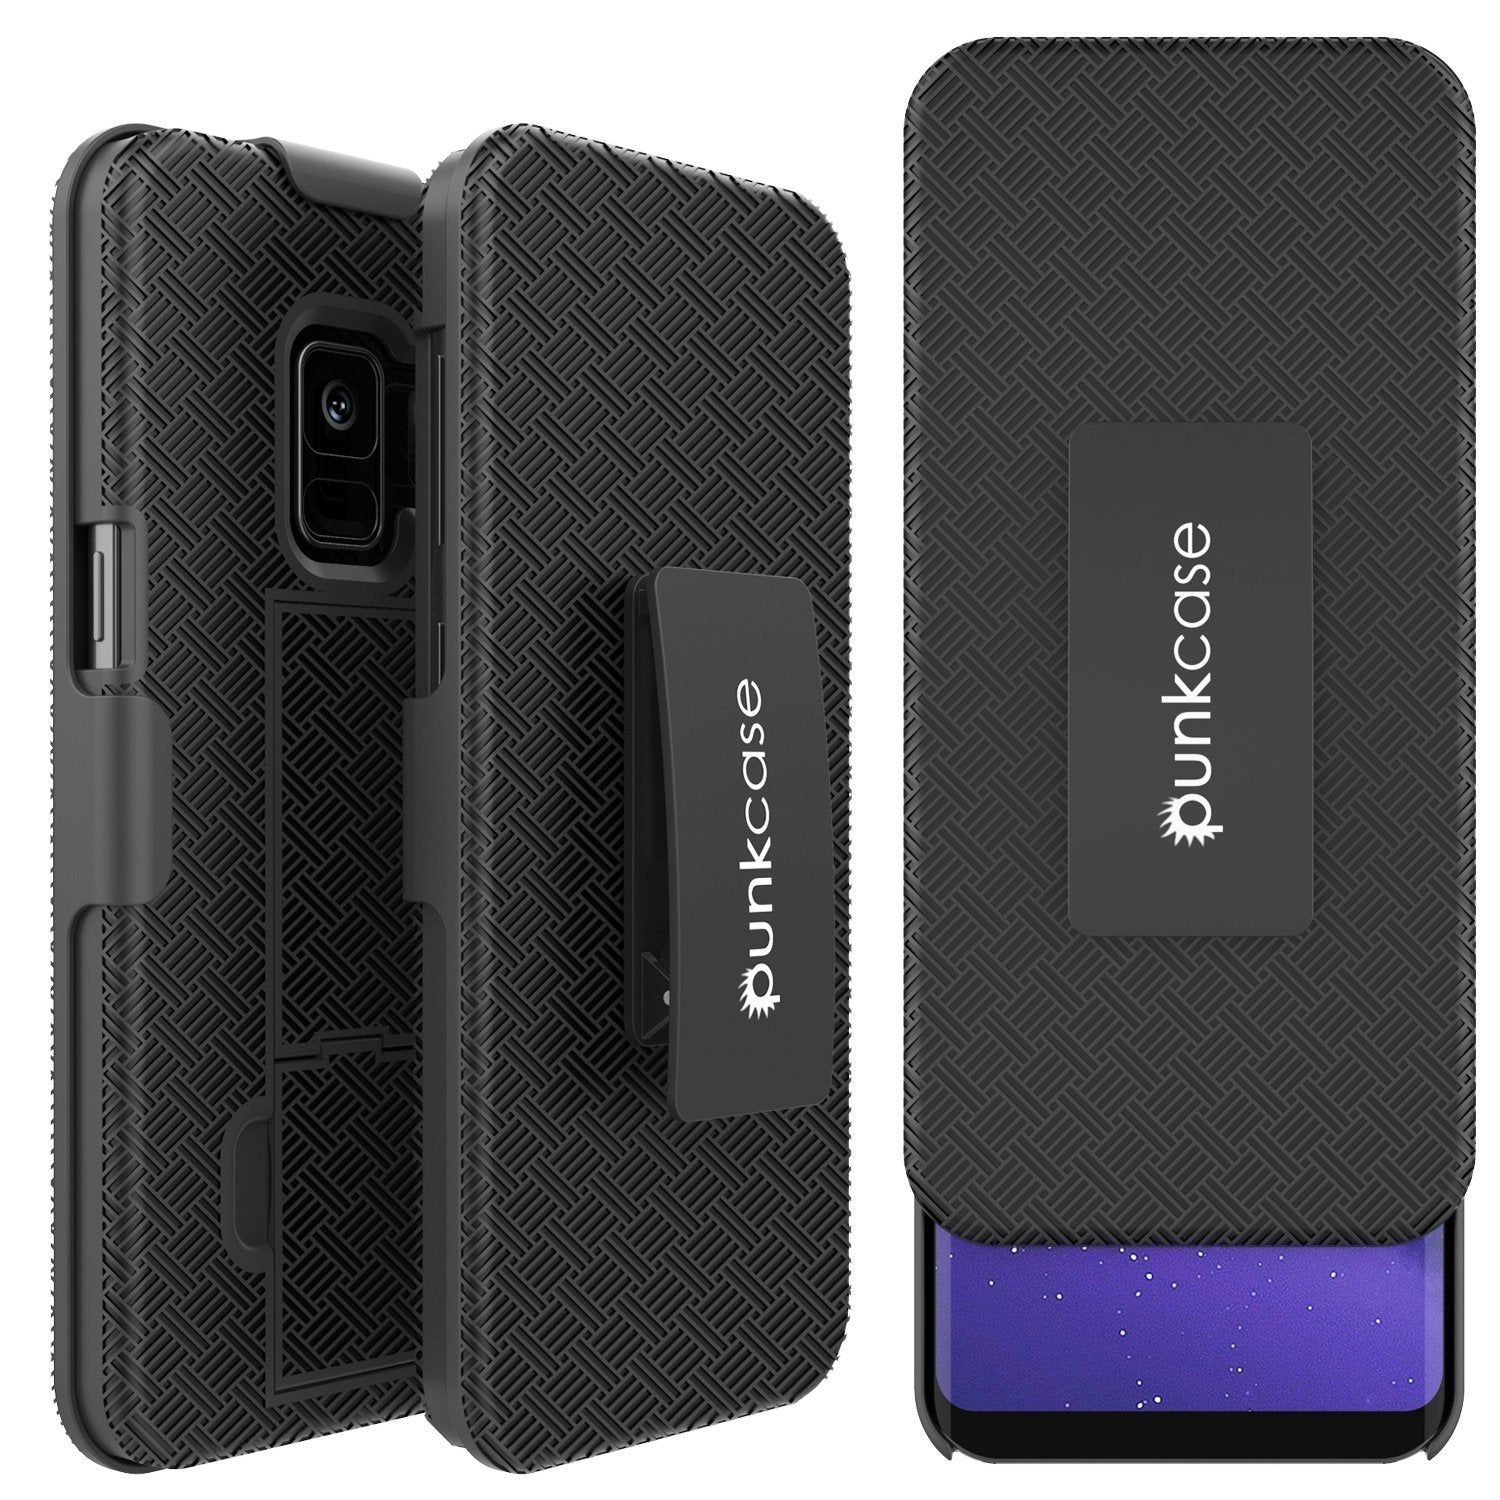 Punkcase Galaxy S10e Case With Screen Protector, Holster Belt Clip [Black]